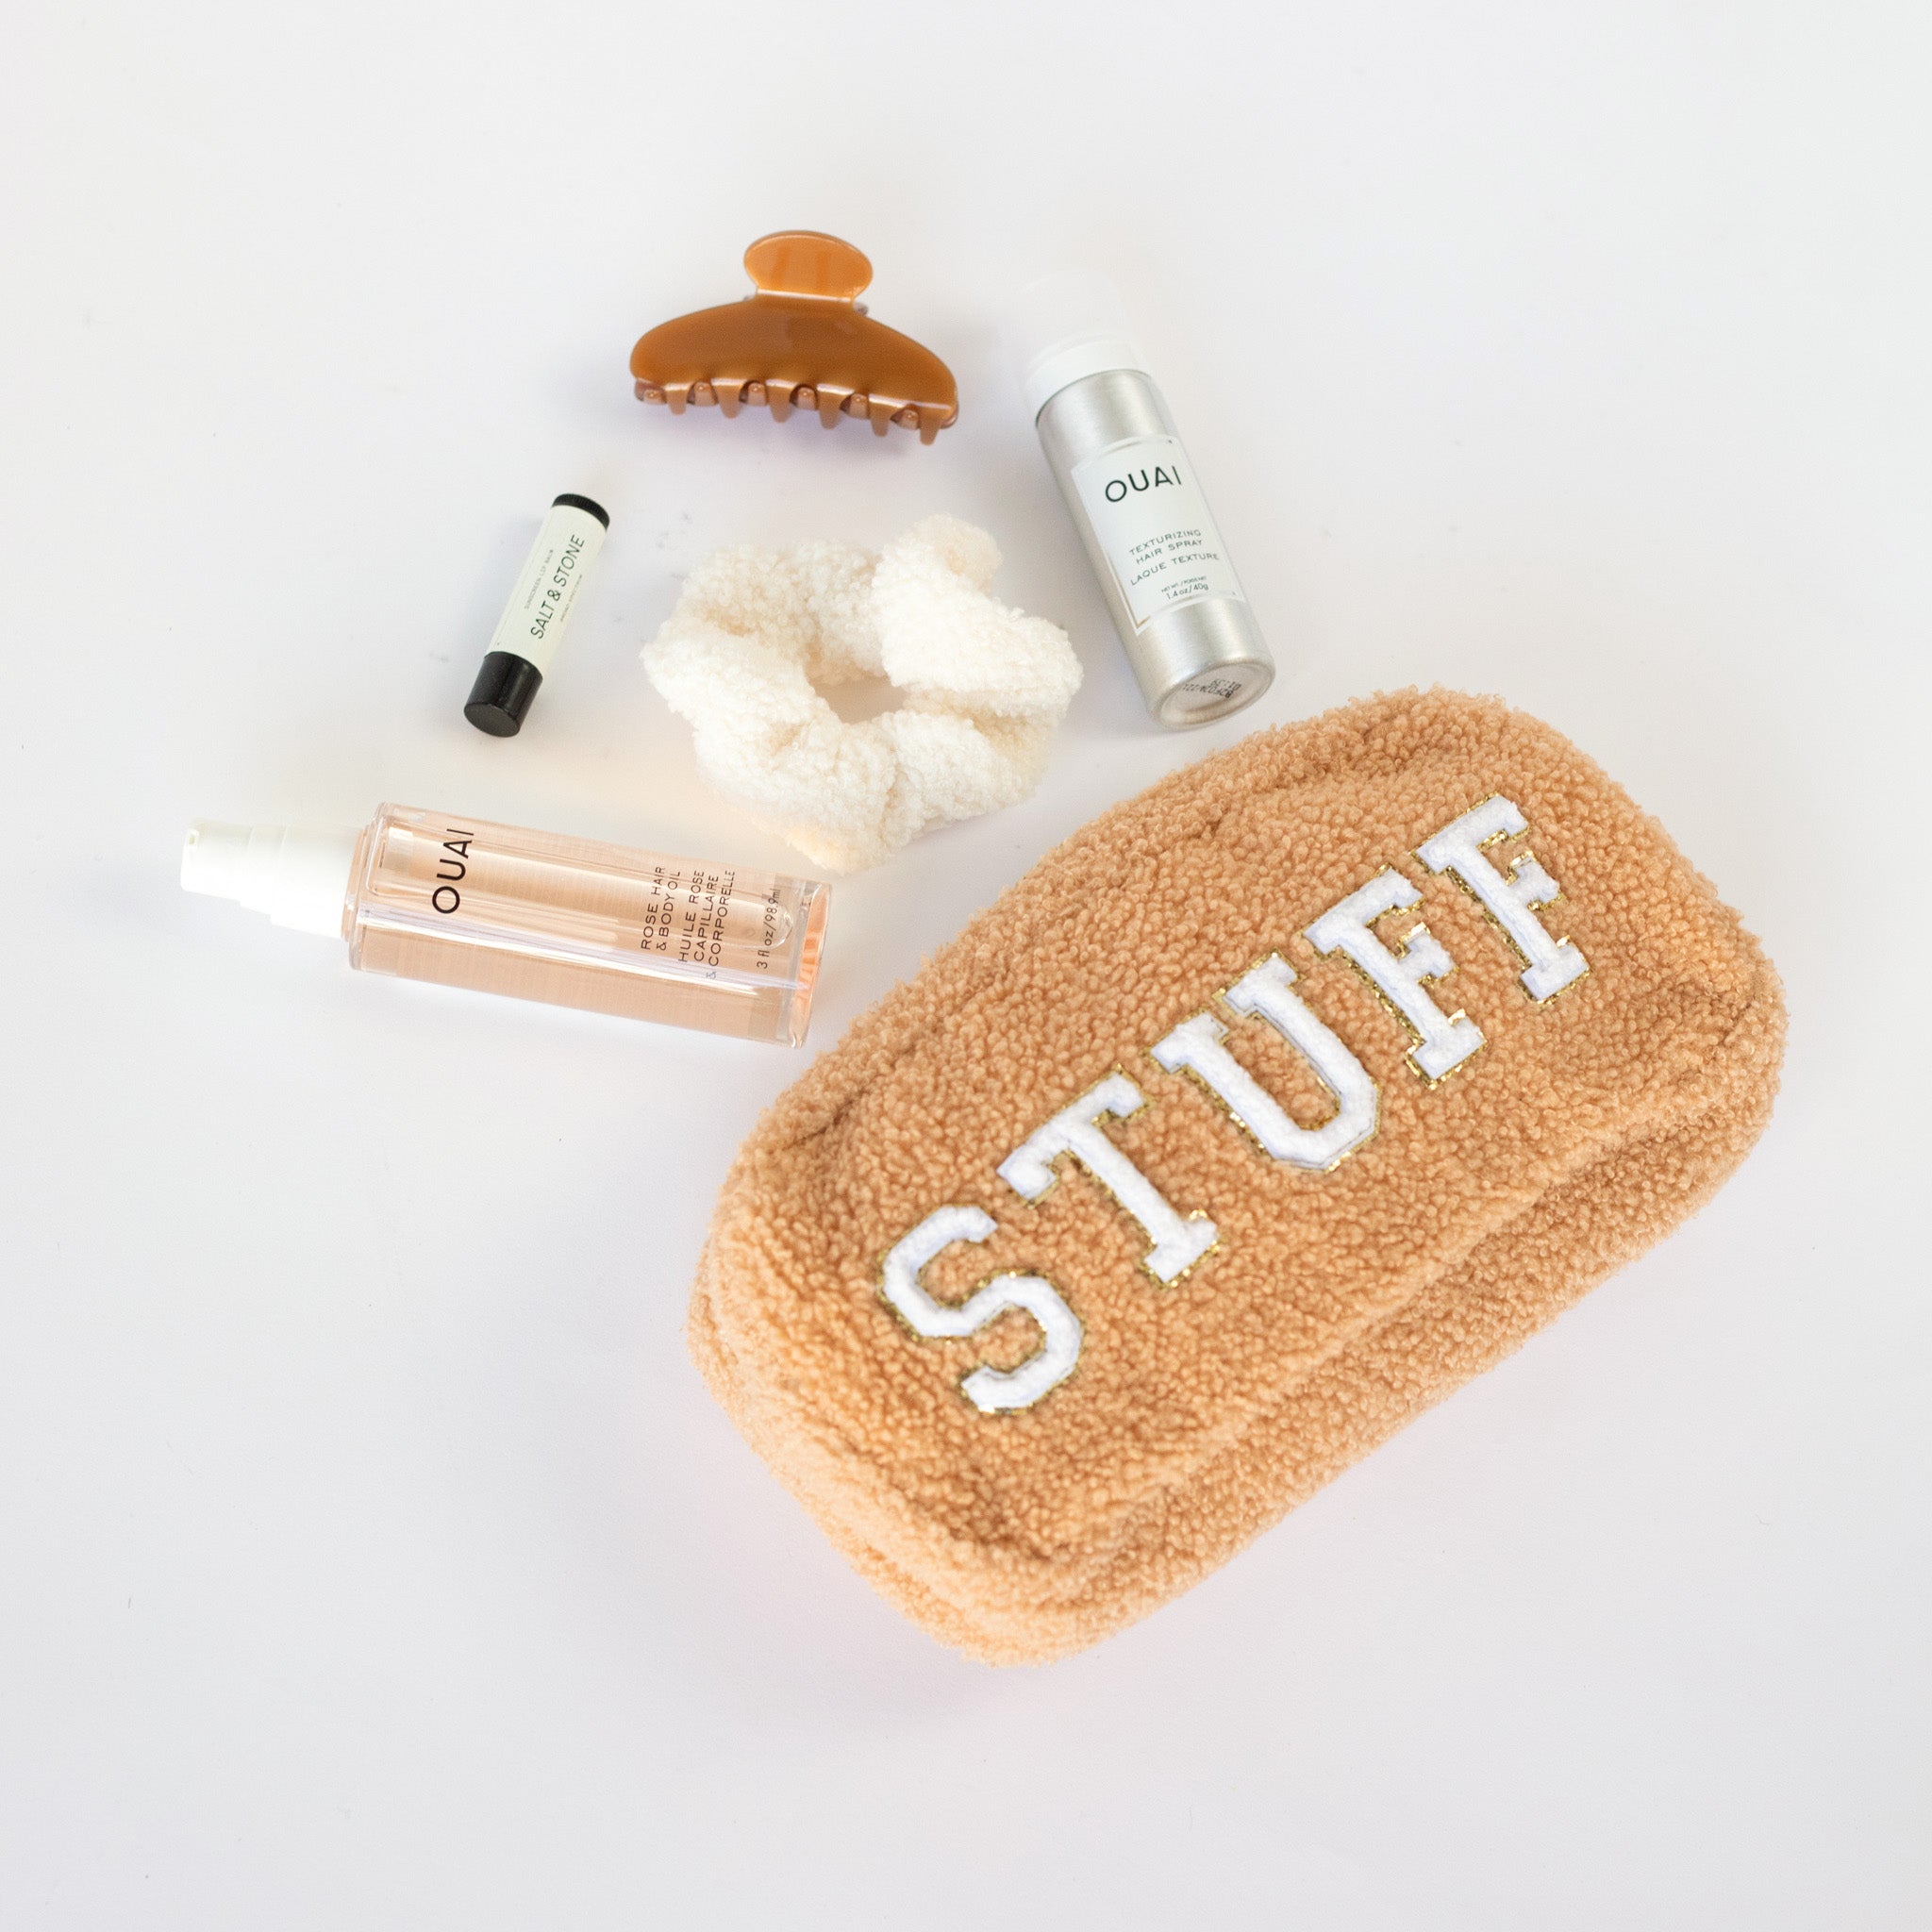 A brown sherpa teddy medium-sized cosmetic bag with gold-trimmed white letters spelling out the word &quot;STUFF&quot; across the length of the bag. Laying on the white background is a bottle of peach colored Ouai hair oil, a Salt + Stone chapstick, a winter white sherpa hair scrunchie, a spray can of Ouai texturizing hair spray, and a caramel colored claw clip.